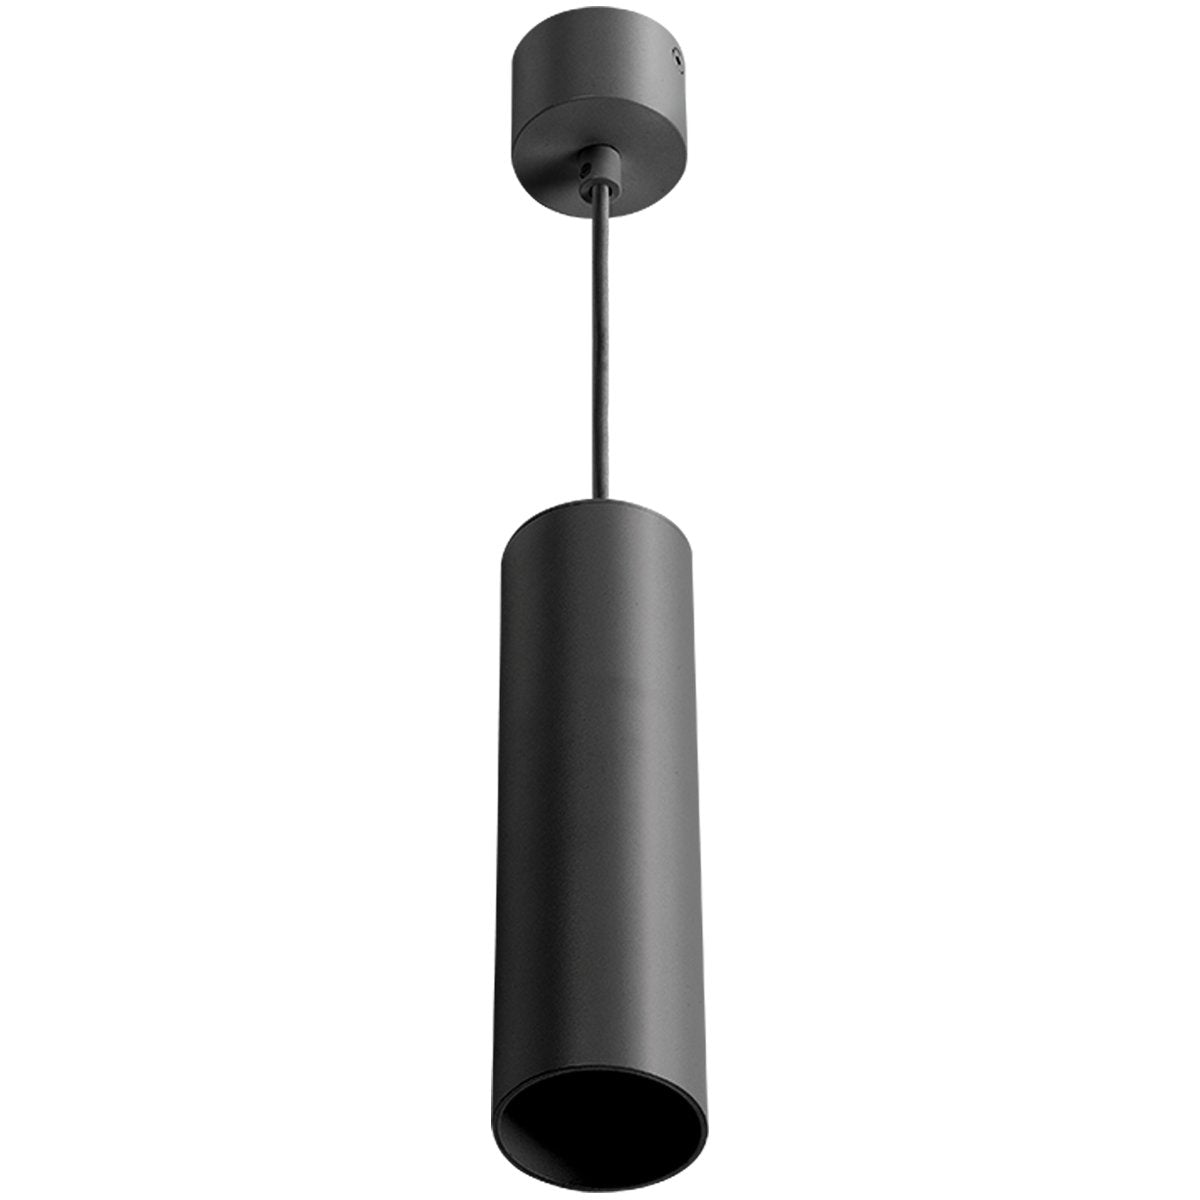 CGC RUTH Black Suspended Cylinder Ceiling Light